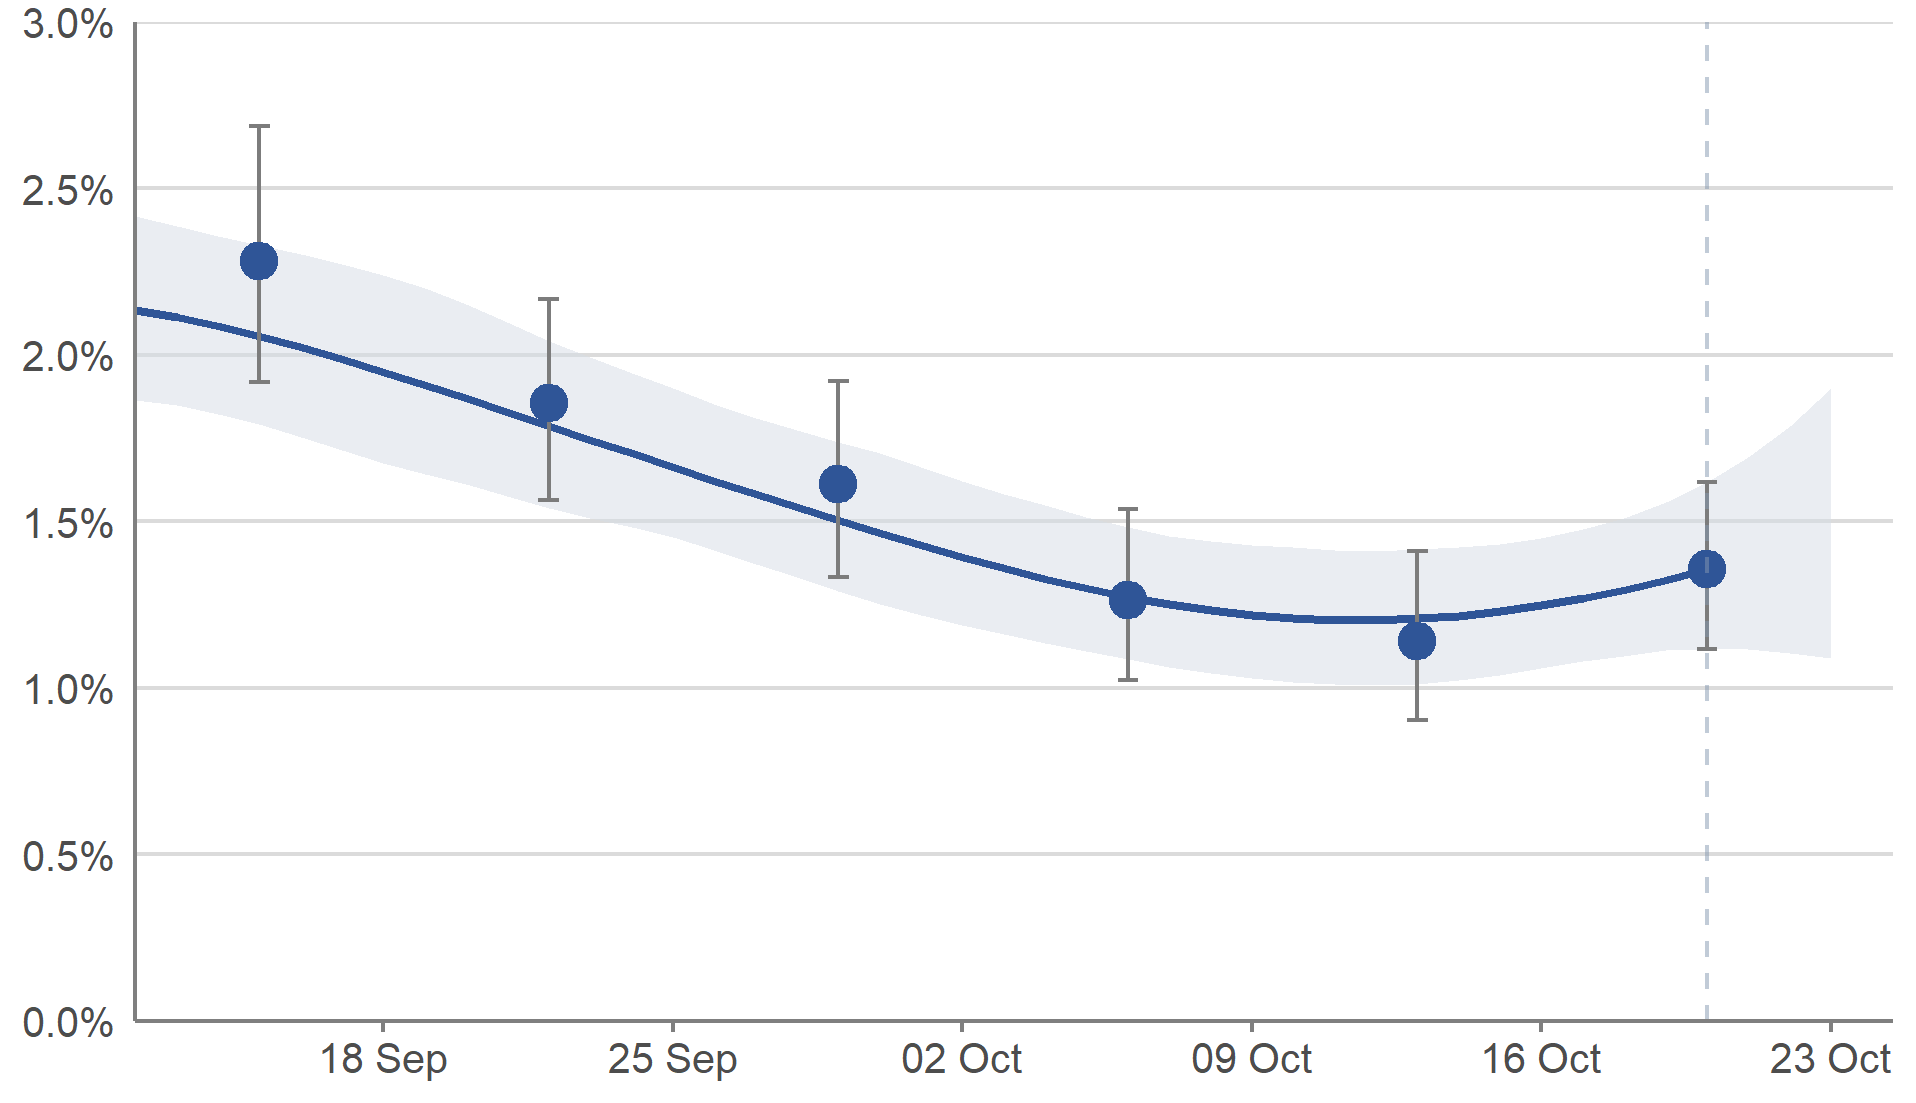 Figure 1: Modelled daily estimates and official reported estimates of the percentage of the private residential population in Scotland testing positive for COVID-19 between 12 September and 23 October 2021, including 95% credible intervals (see notes 2,3,4,5,6)  This chart shows modelled daily estimates of the percentage of people testing positive for COVID-19, and accompanying credible intervals from mid-September to late October. The model smooths the series to understand the trend and is revised each week to incorporate new test results. Modelled daily estimates are used to calculate the official reported estimate and provide the best indication of trends over time.  In Scotland, it is estimated that there were early signs that the percentage of people testing positive for COVID-19 in the private residential population has increased in the most recent week in Scotland.